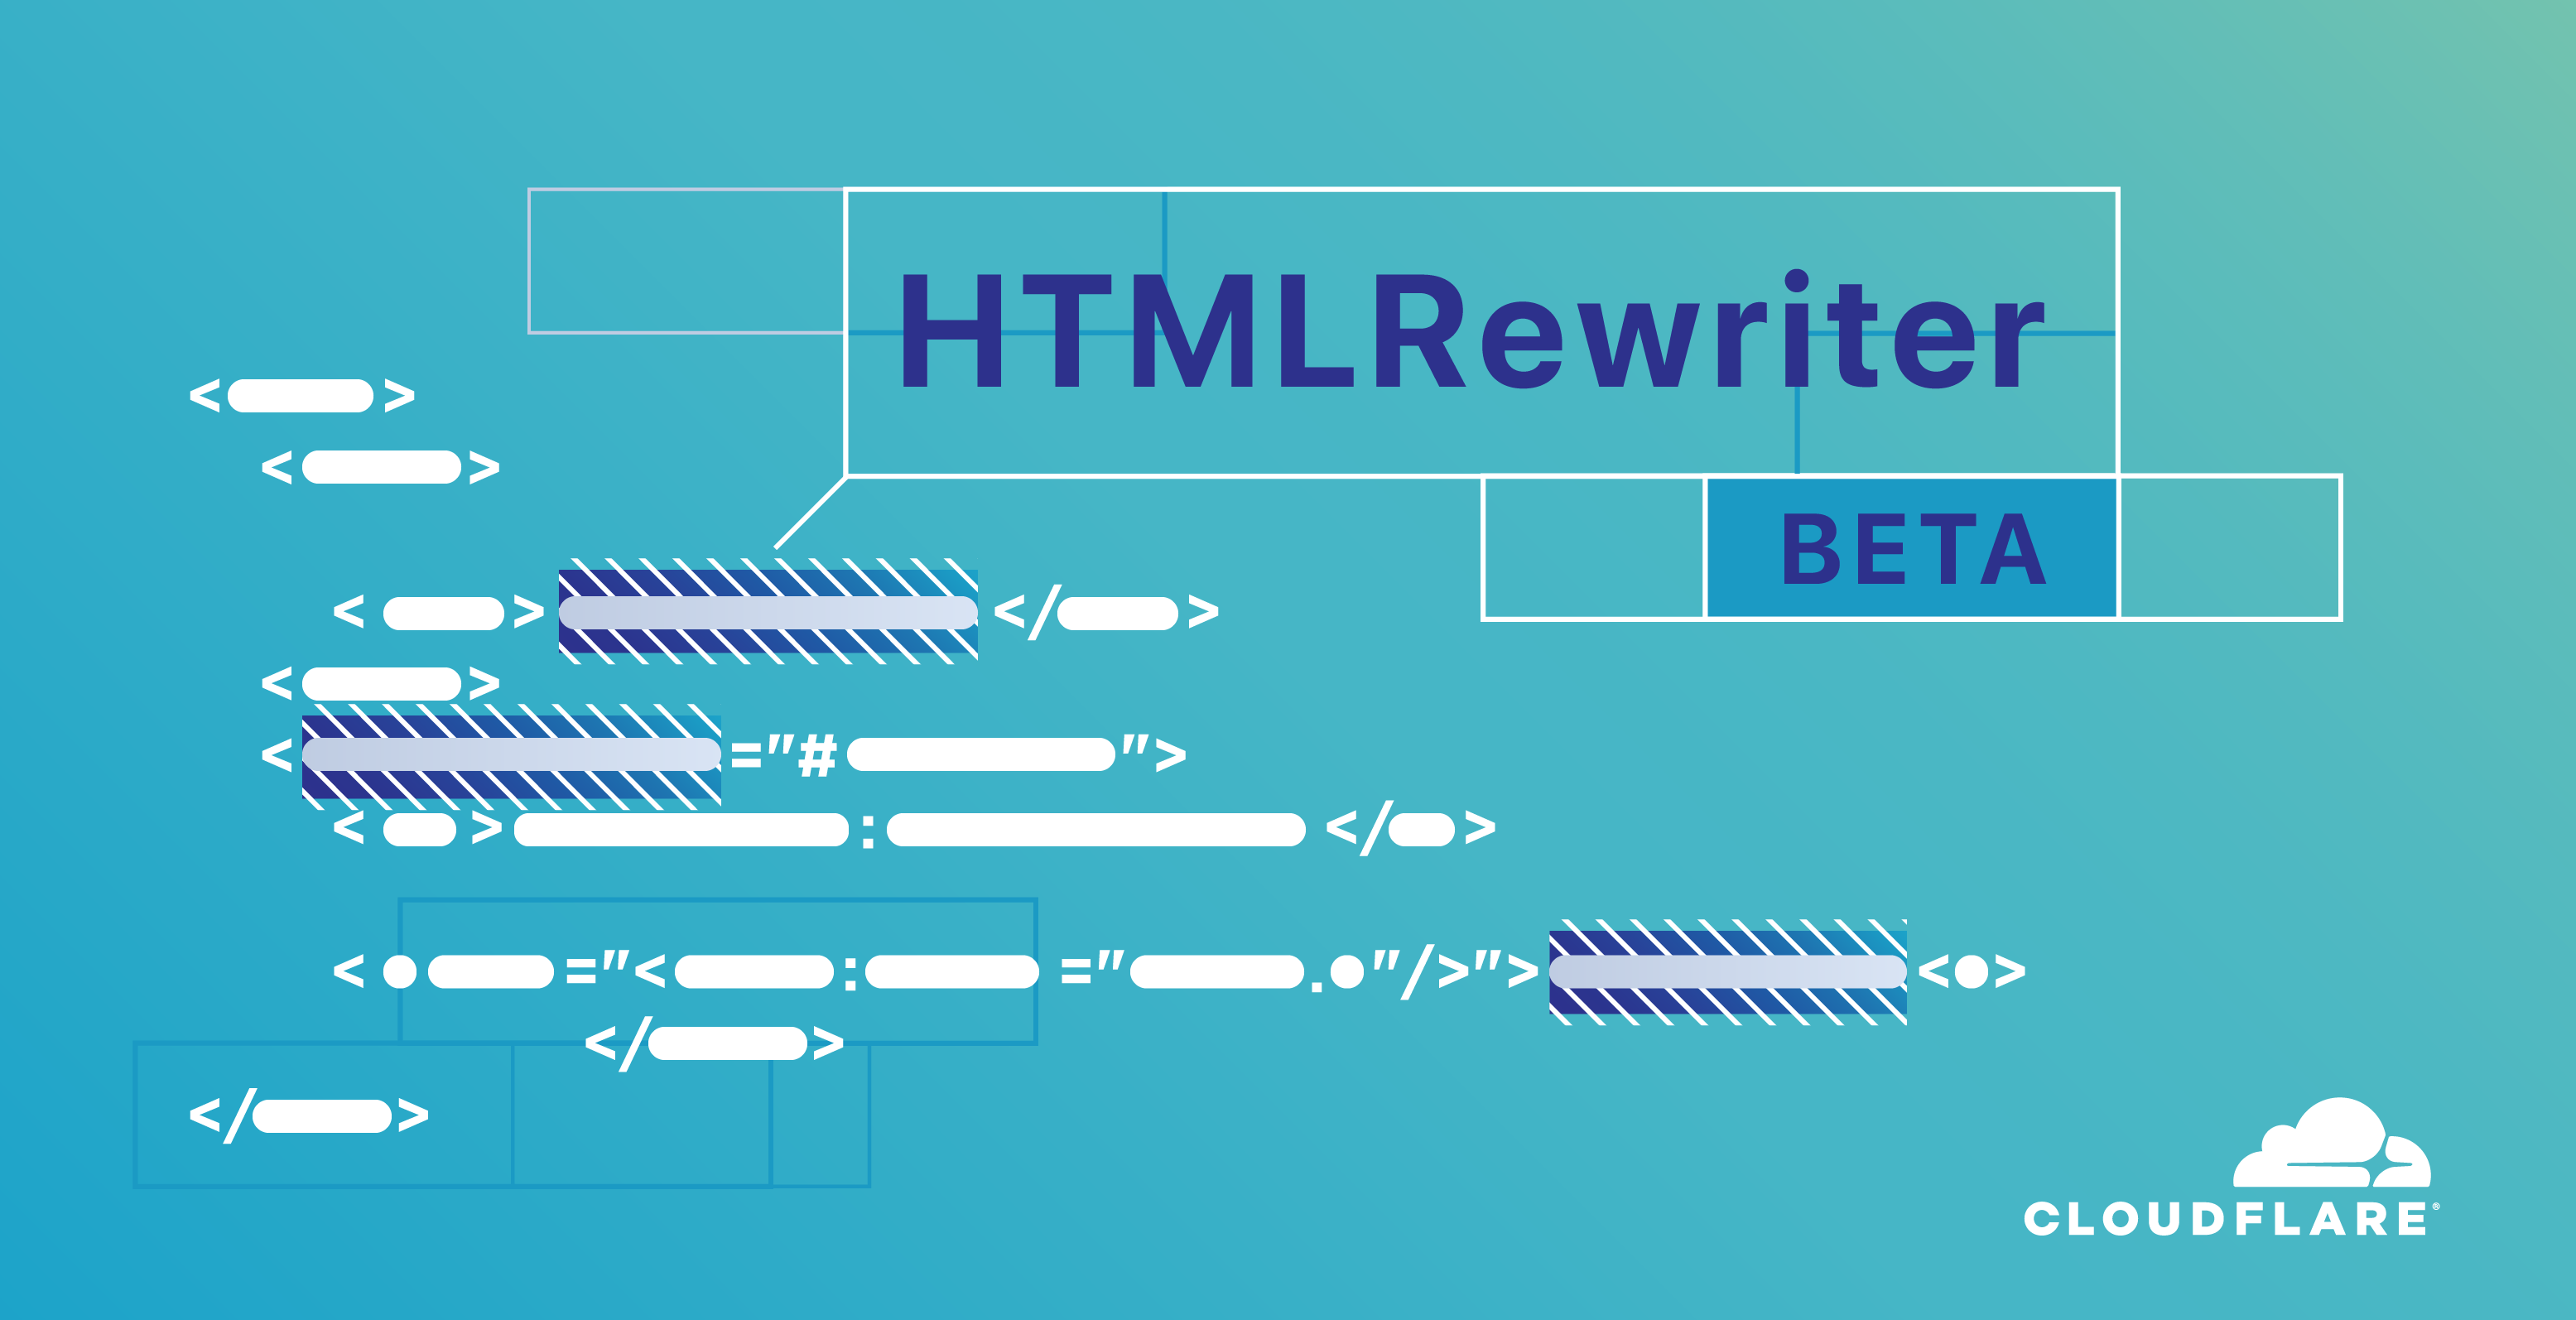 Not so static... Introducing the HTMLRewriter API Beta to Cloudflare Workers